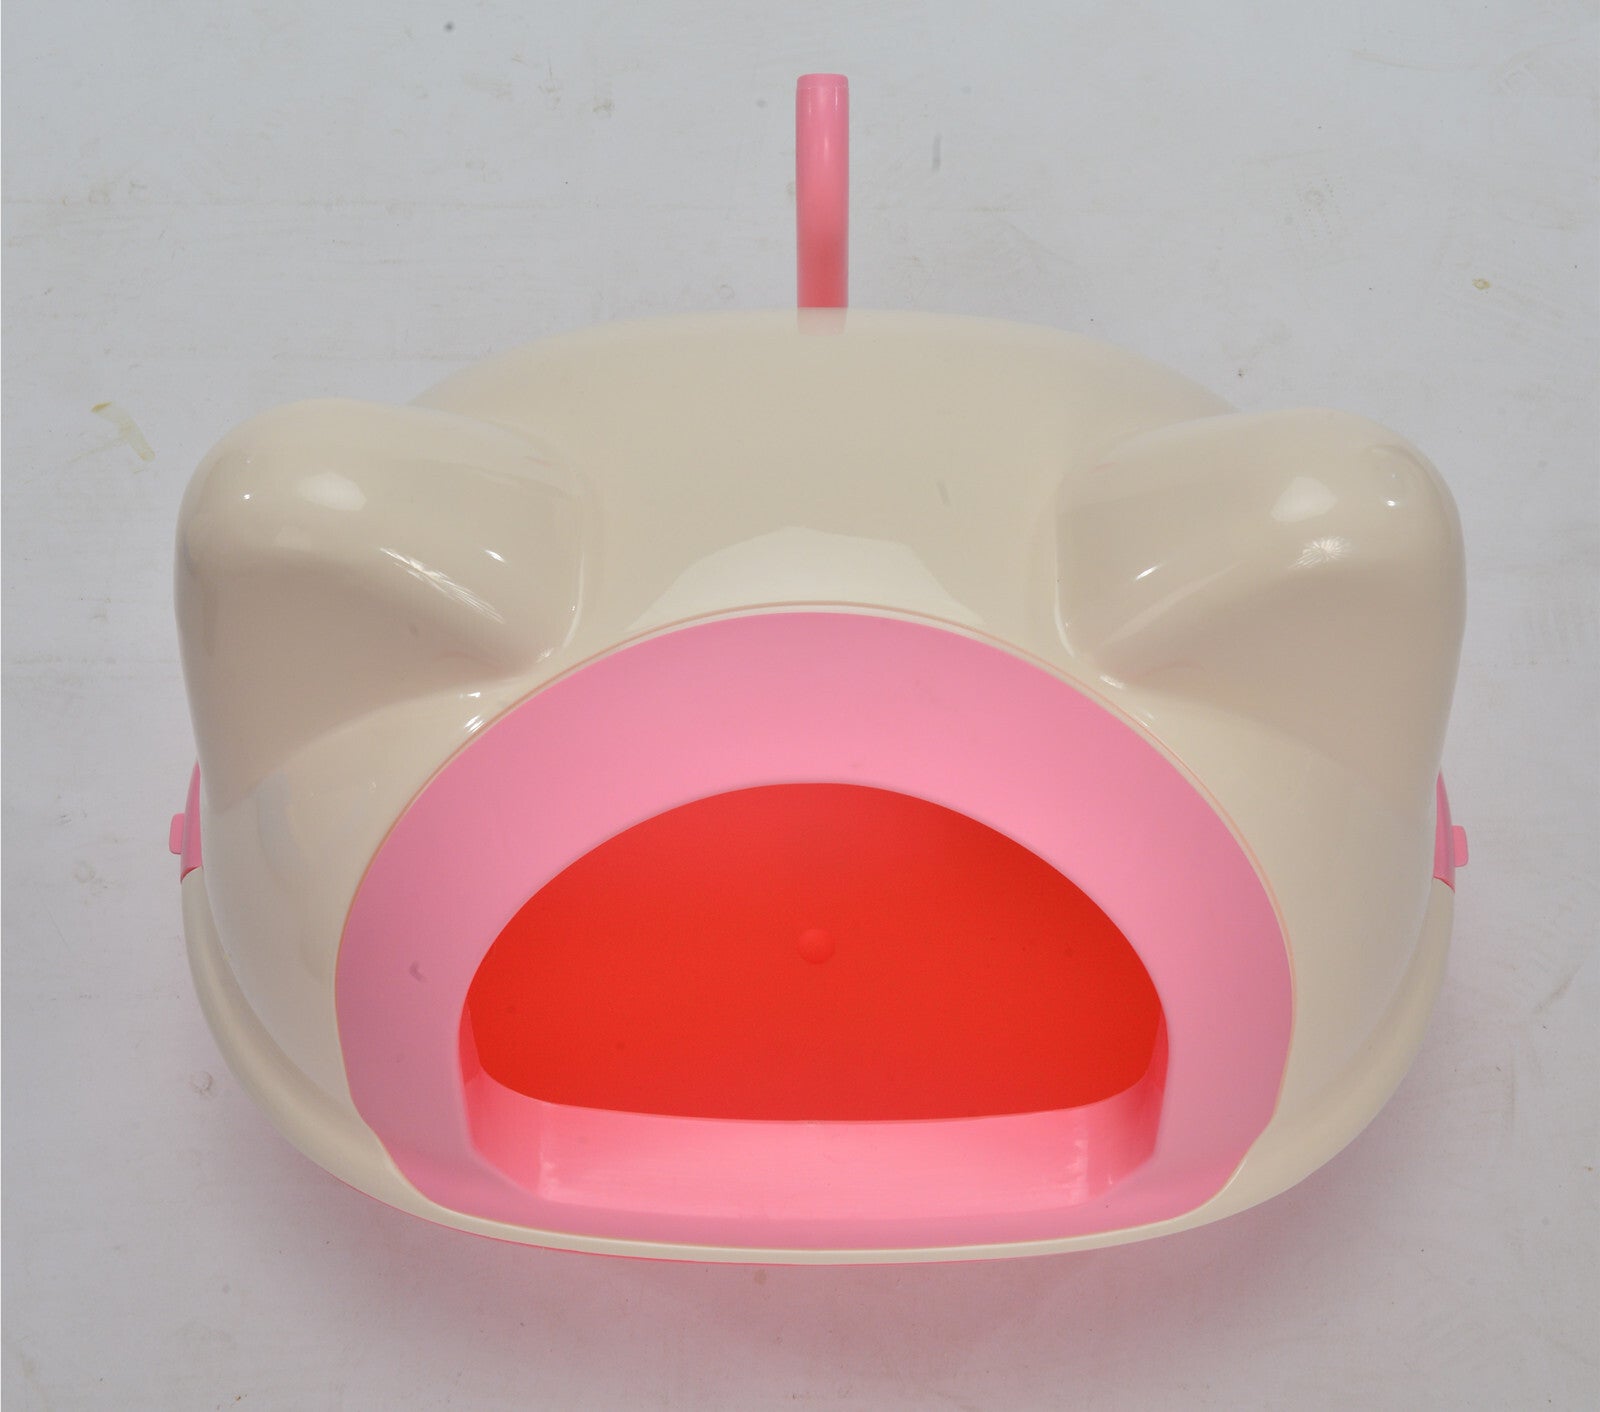 Medium Hooded Cat Toilet Litter Box Tray House With Scoop Pink